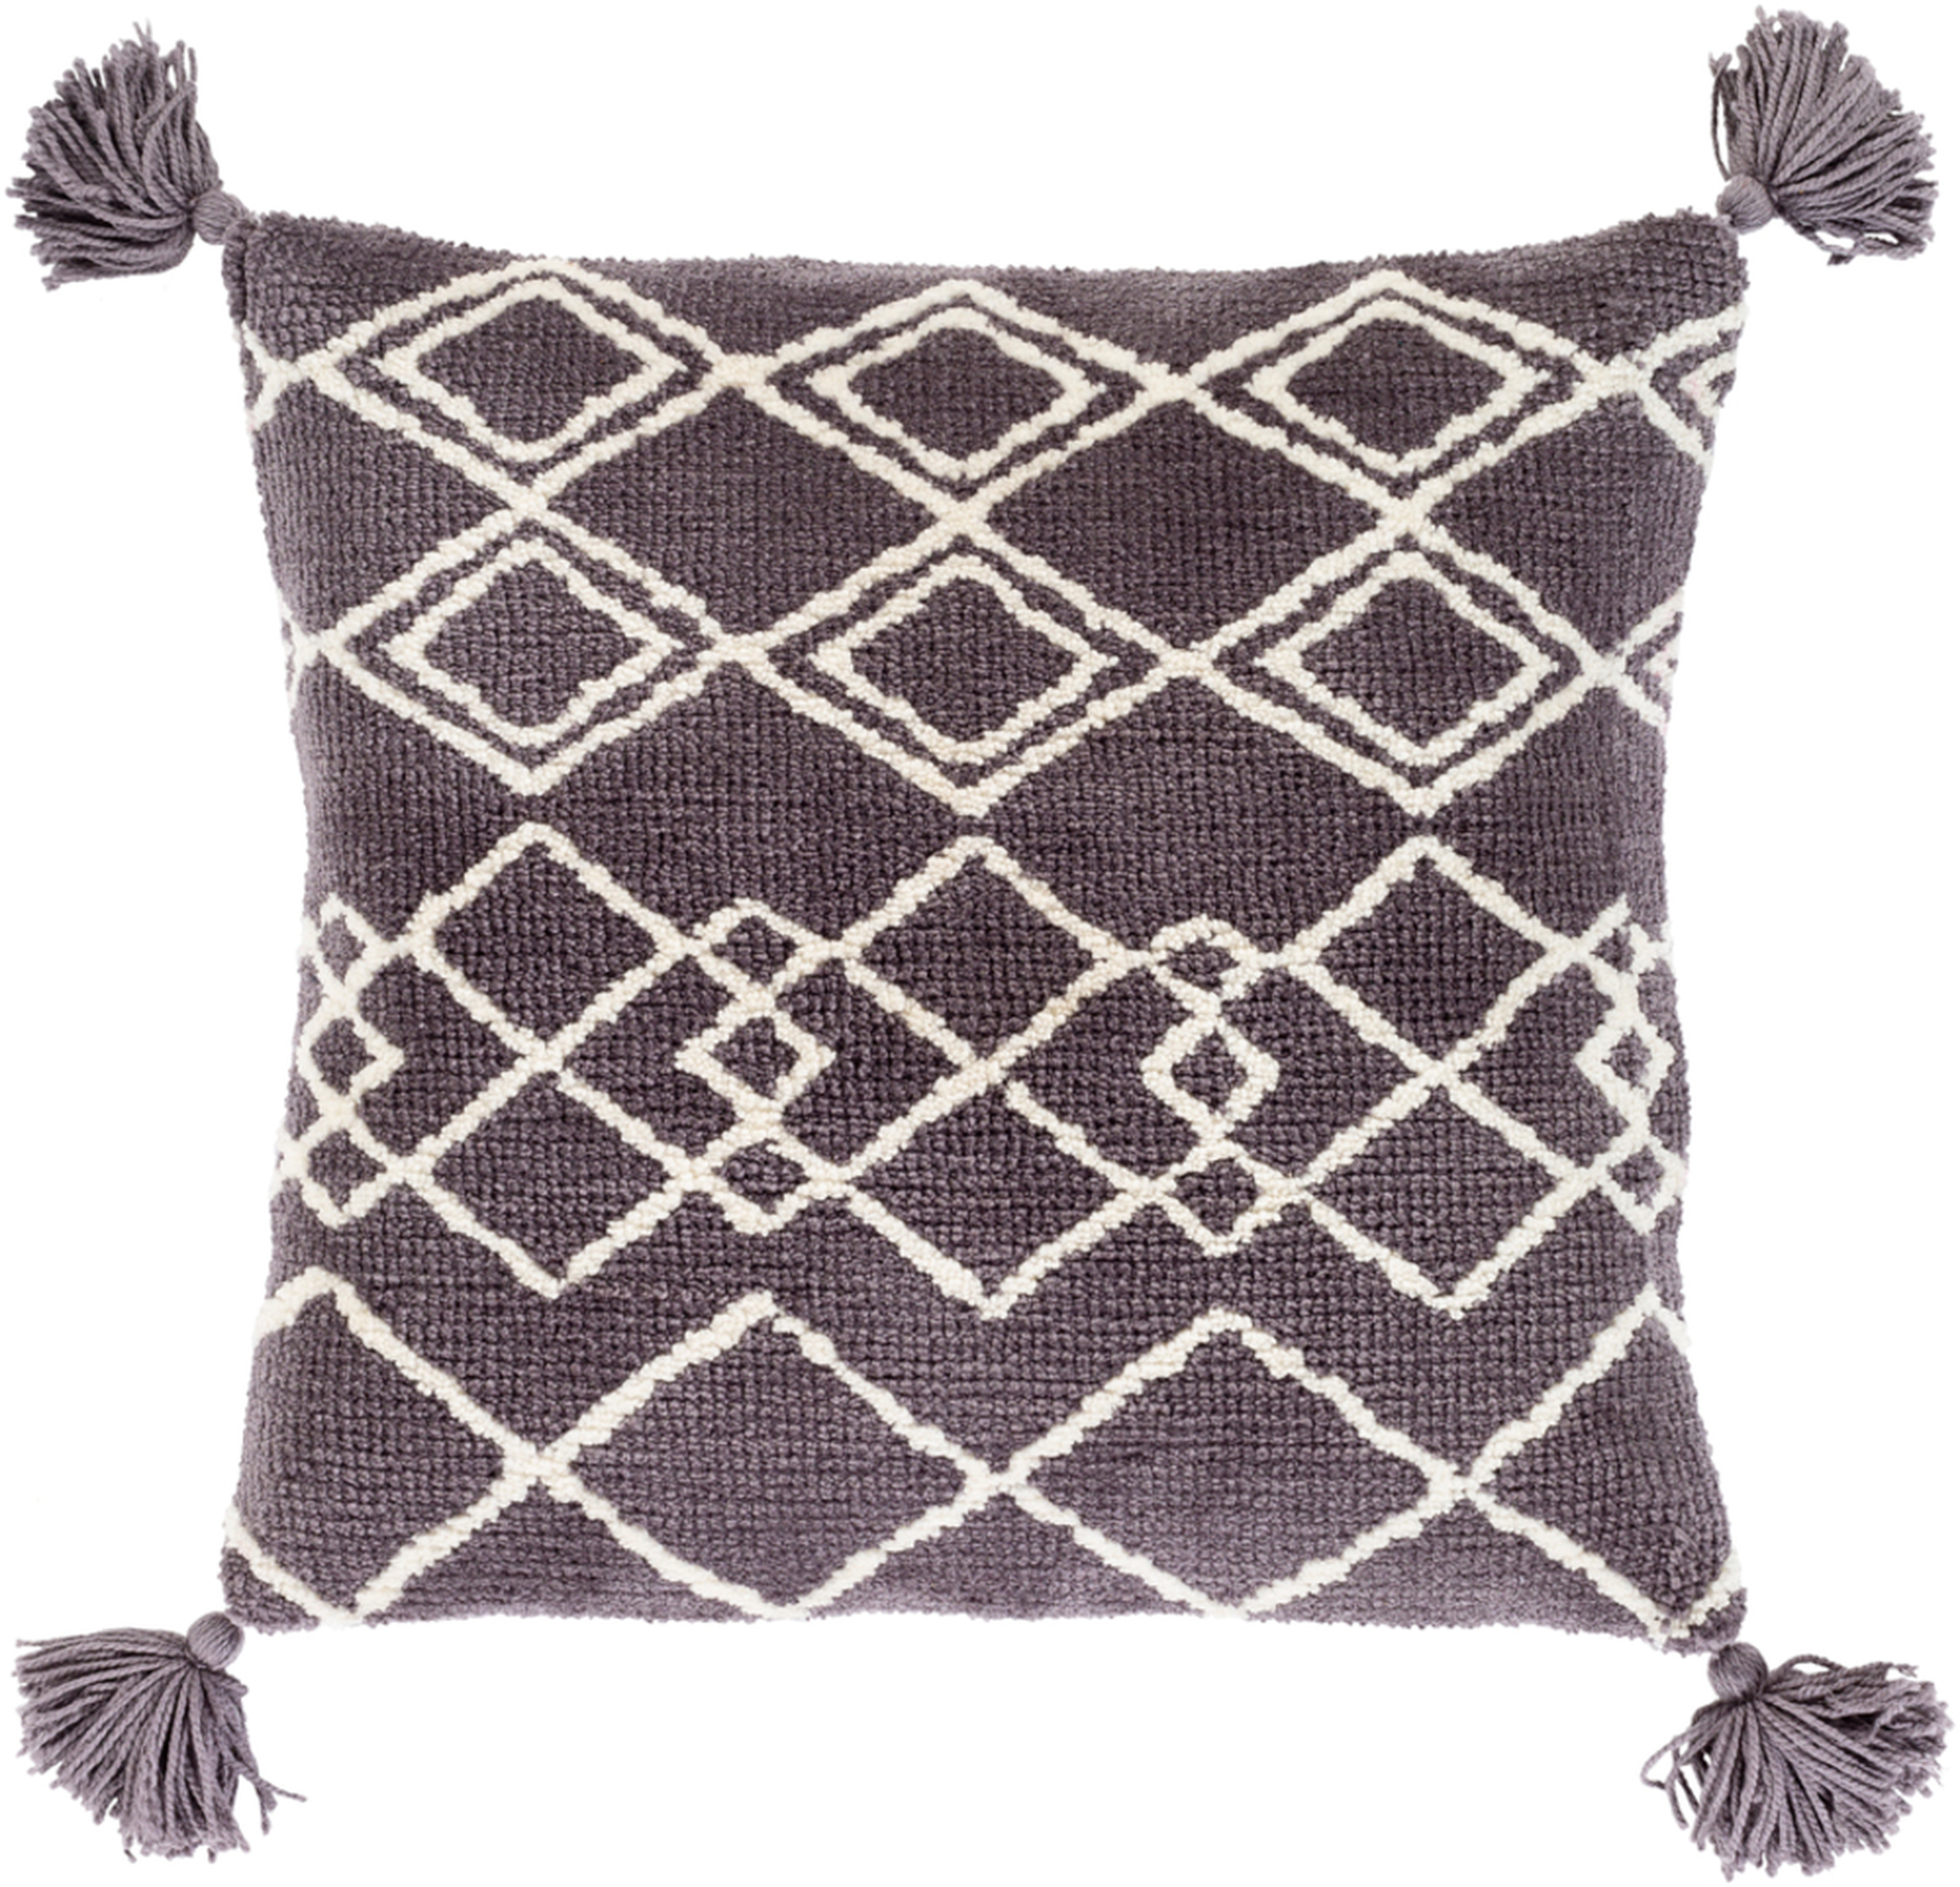 Avah Pillow Cover, 18" x 18", Charcoal - Roam Common